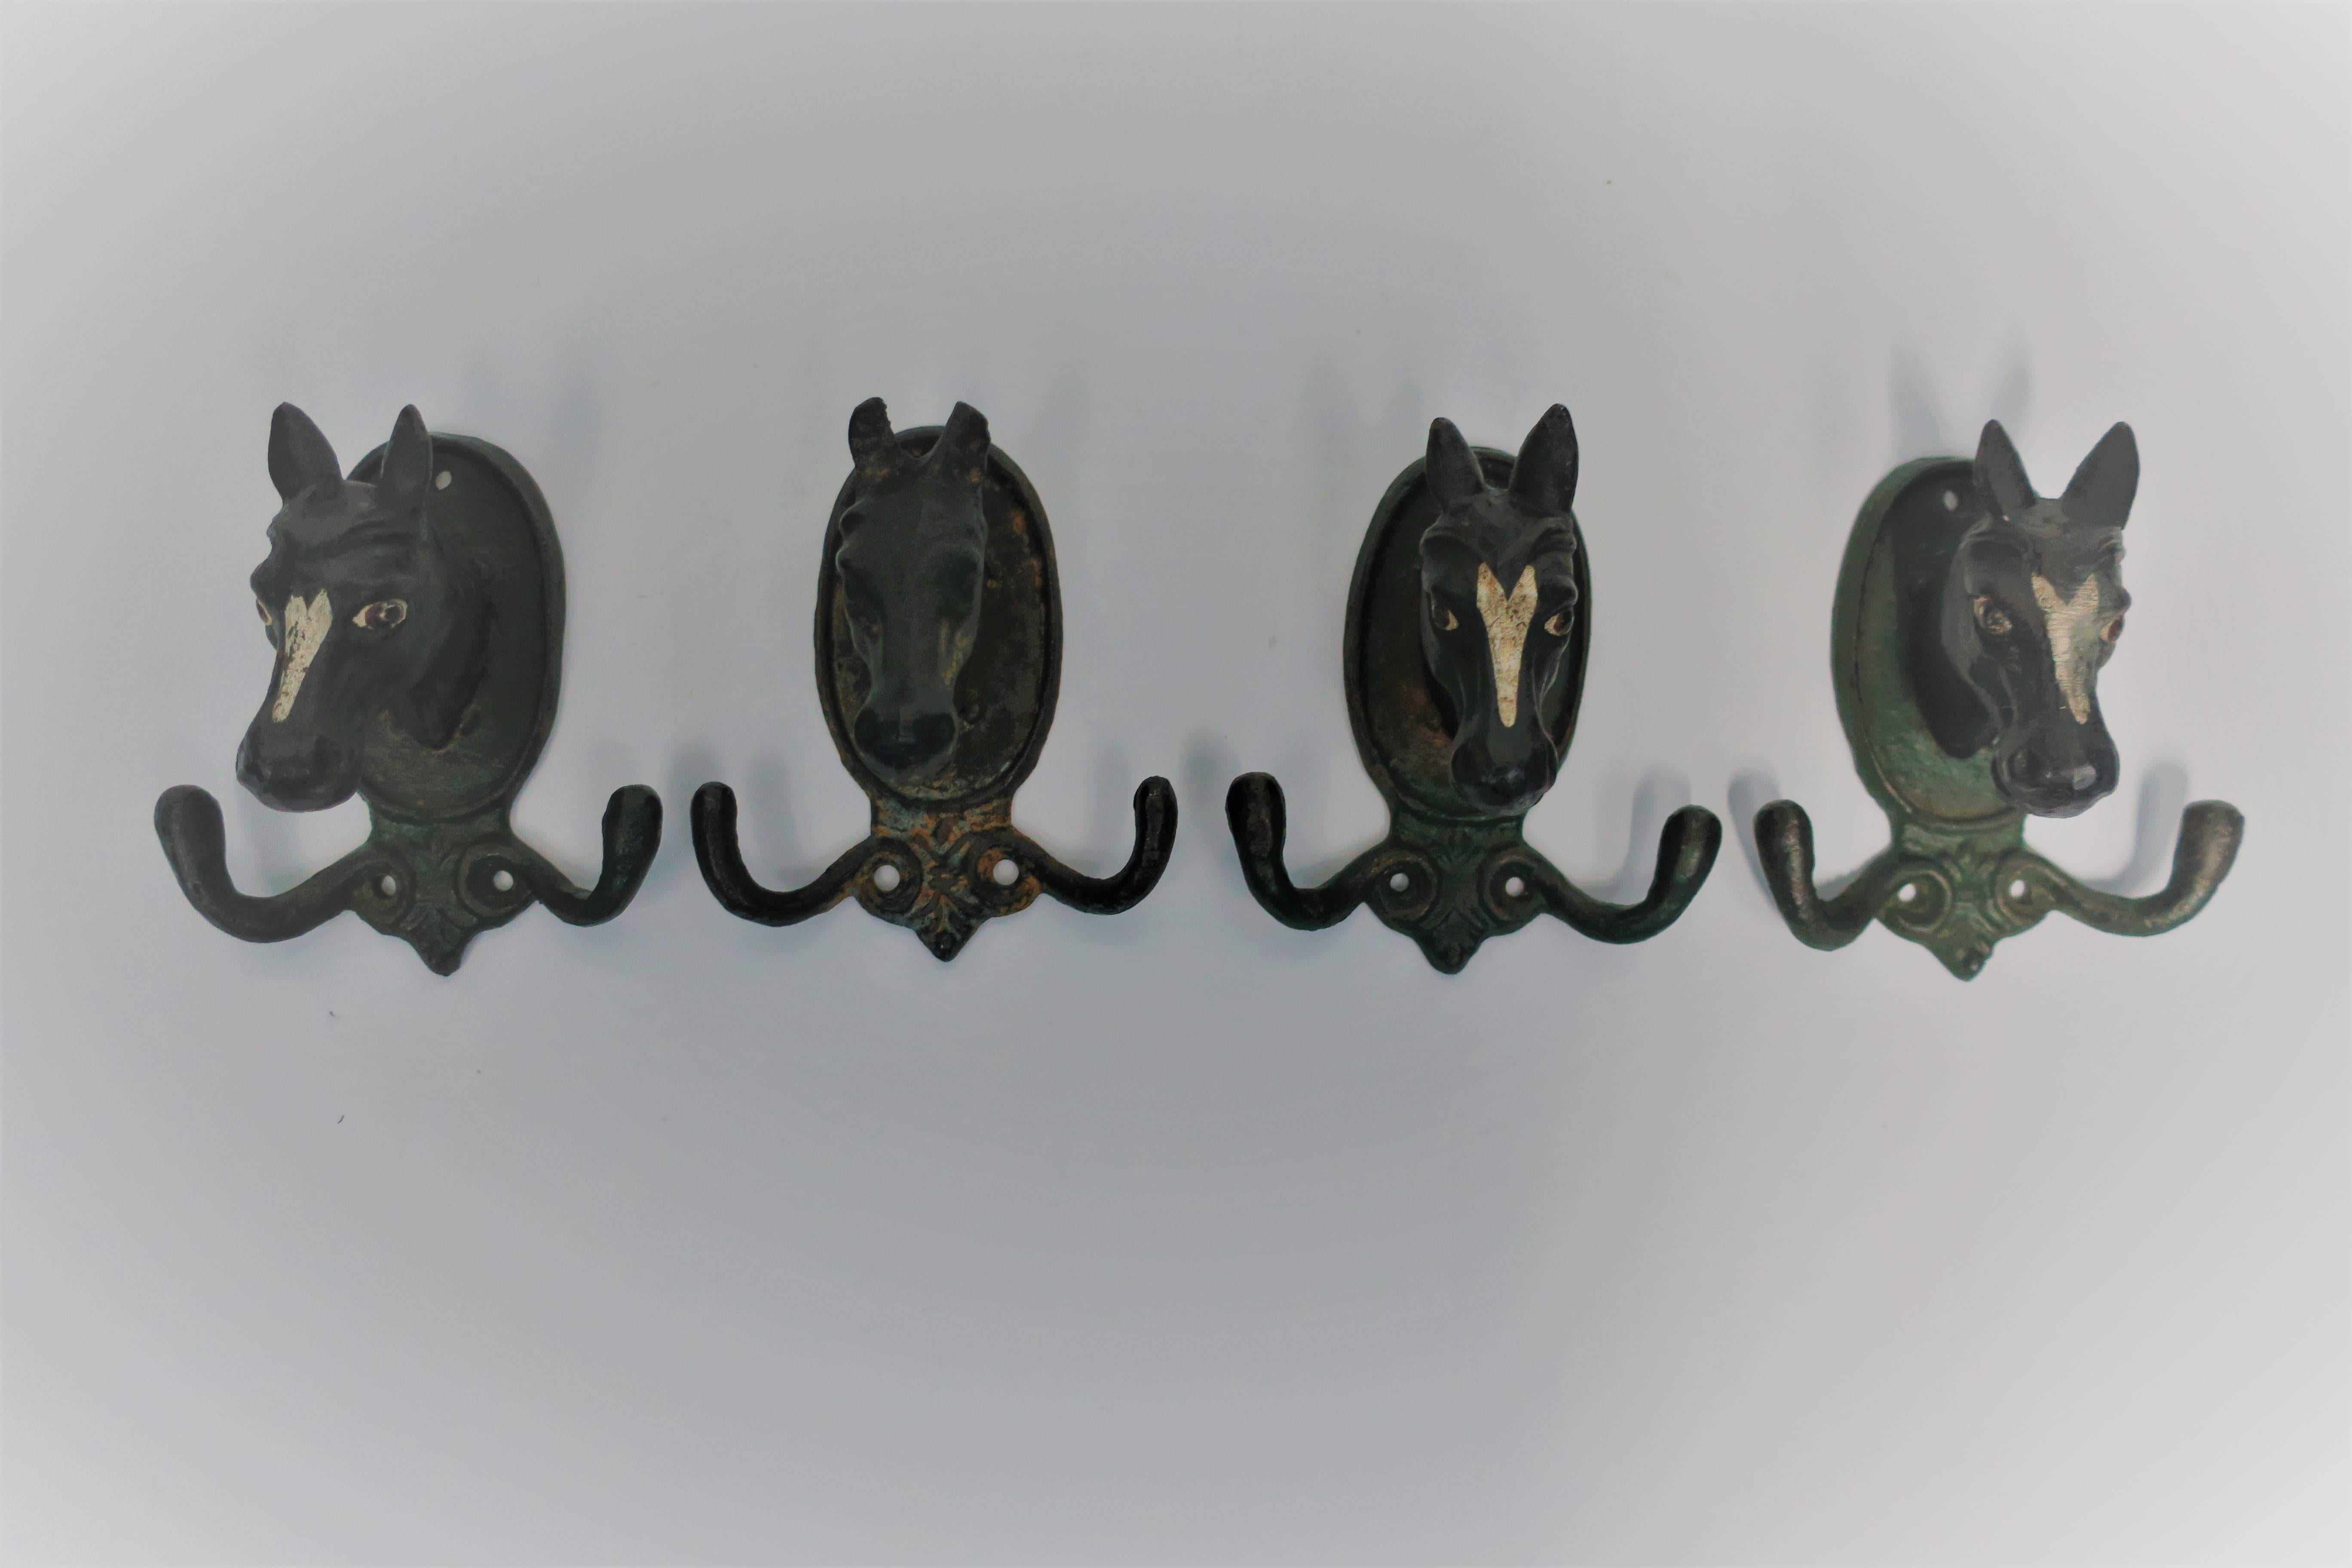 A set of four vintage horse or equine painted iron hardware wall hooks. Paint colors include white, black, and dark green. Two 'hooks' on either side of each. Each piece measures 4 3/8 inches high x 4 inches wide. Set available here online. By